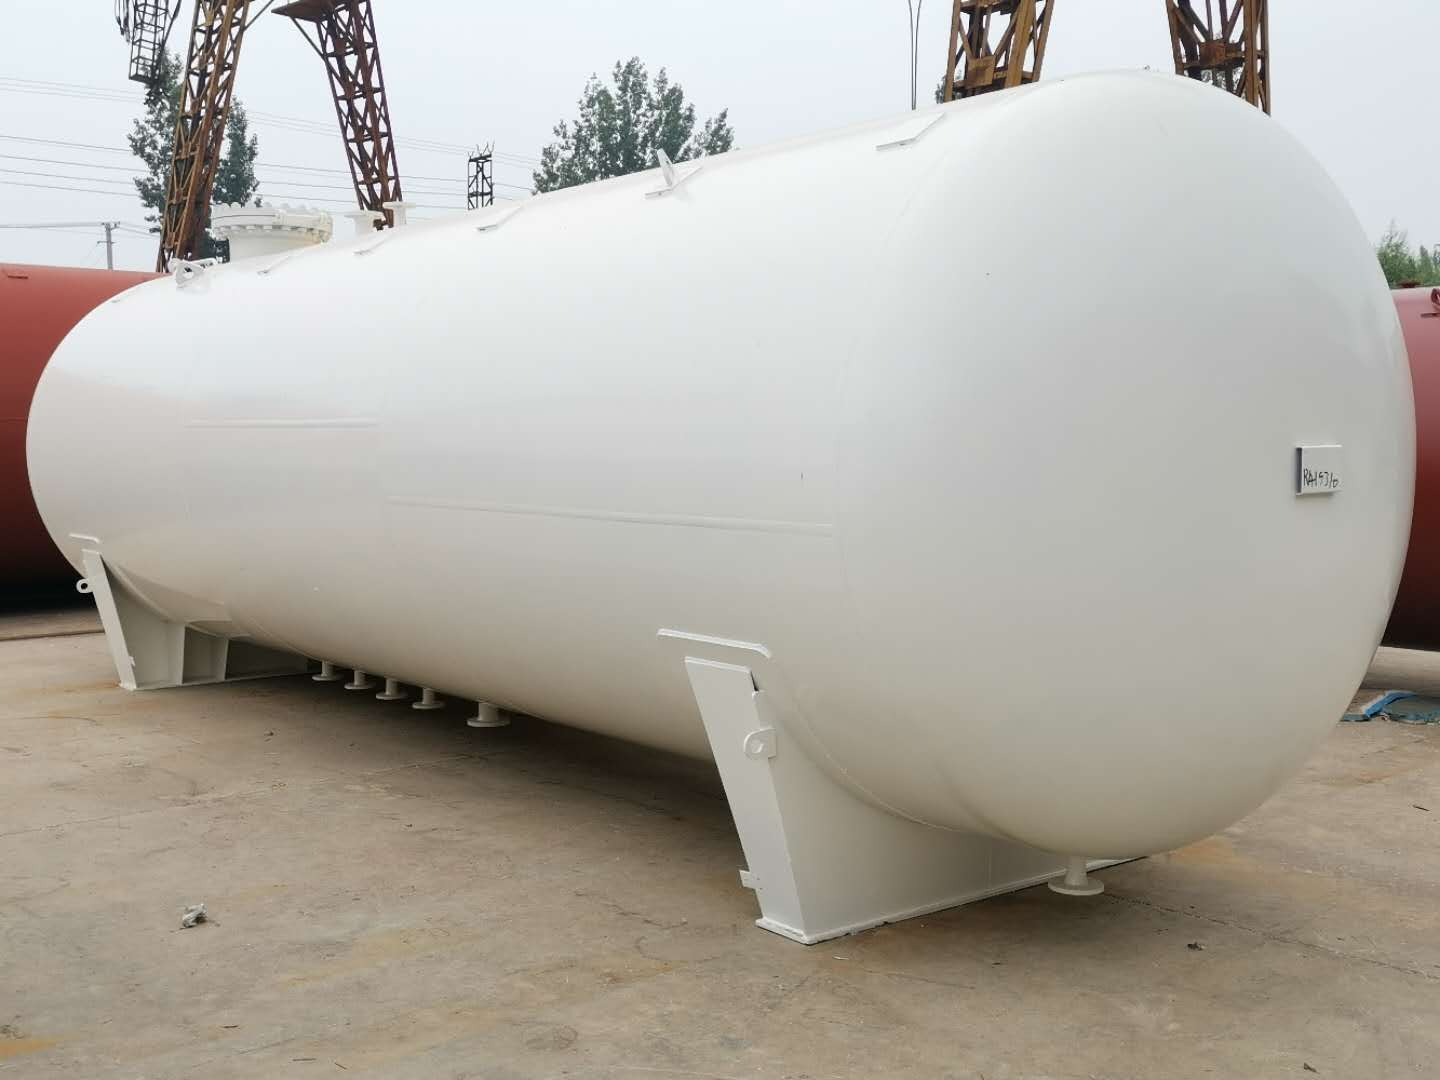 Liquefied petroleum gas storage tanks are commonly used equipment for containing